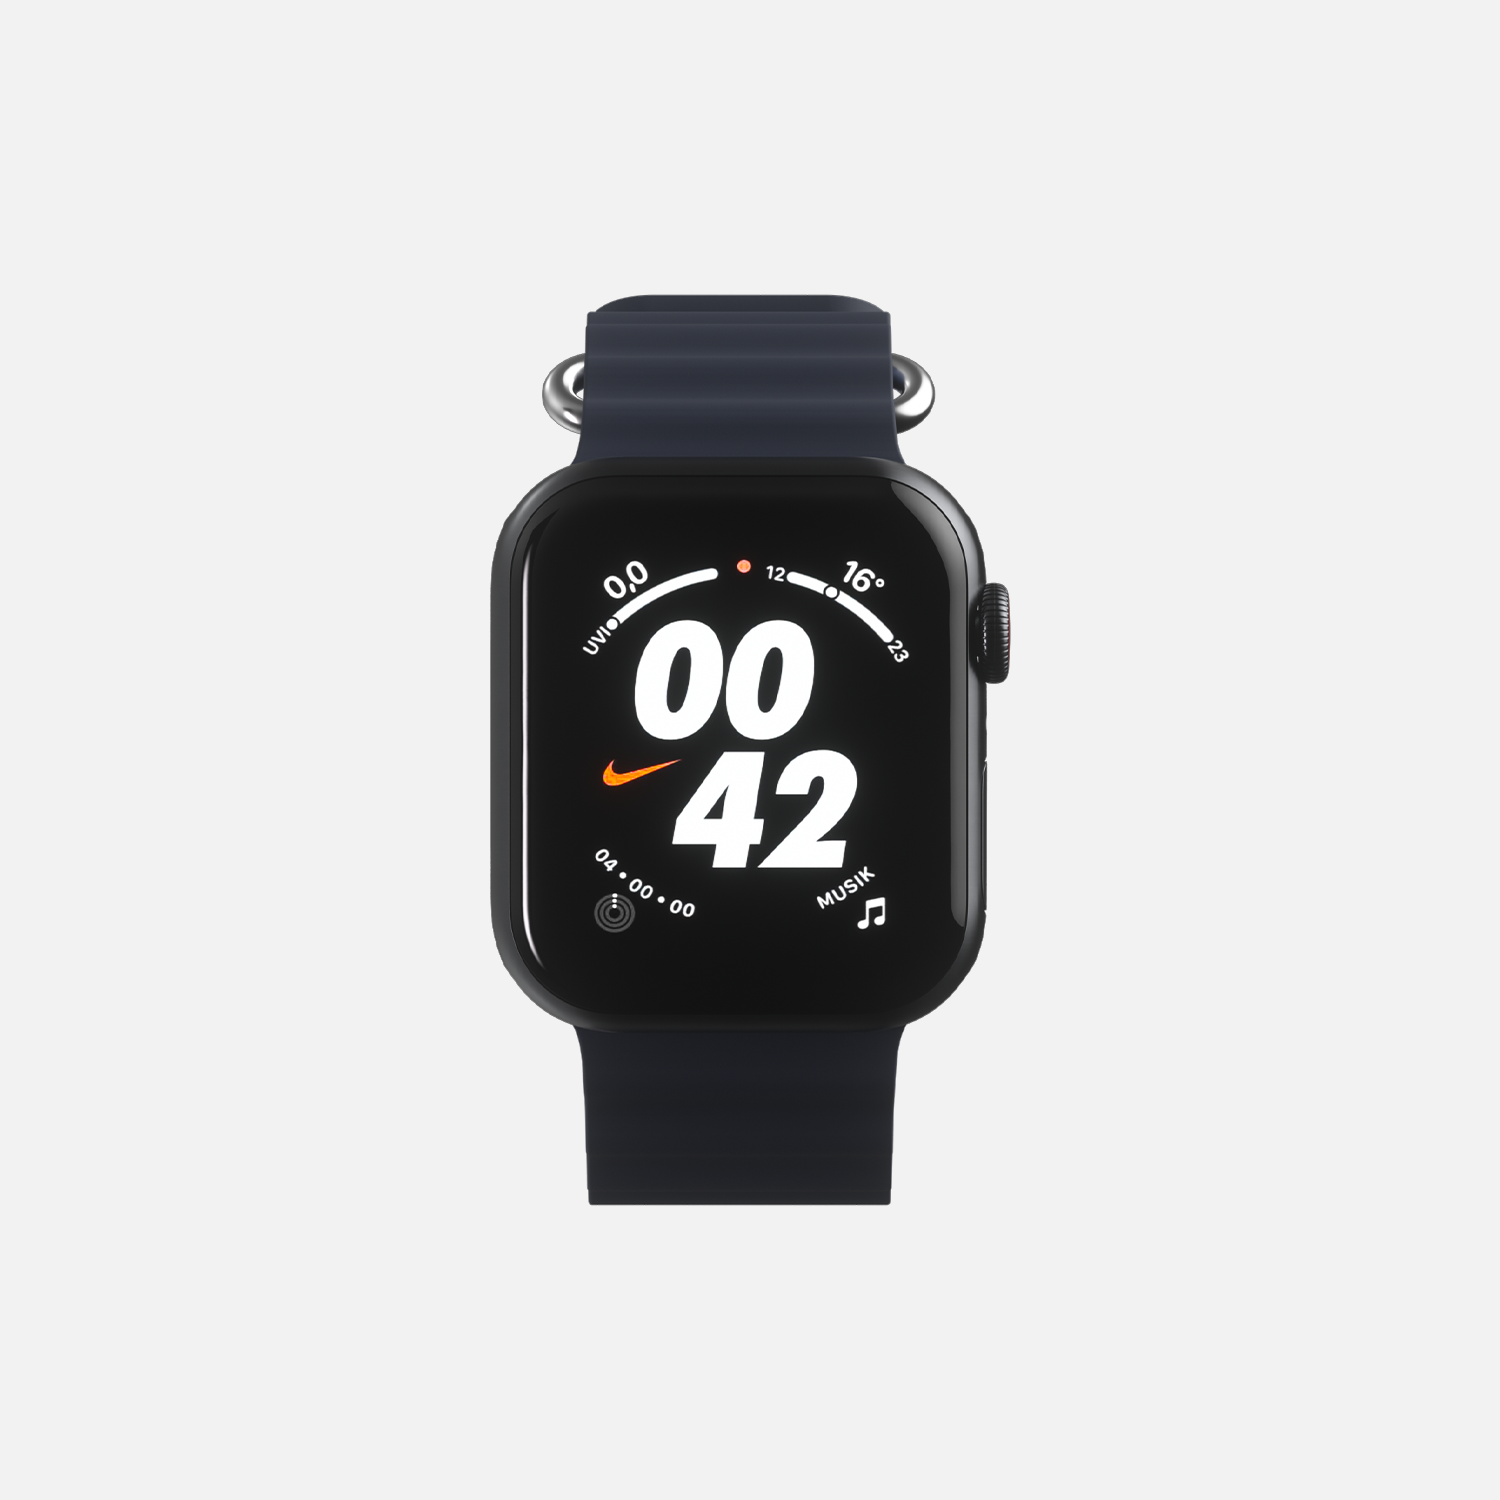 Apple Smartwatch with Nike interface, black sports band, fitness tracking features, on a white background."